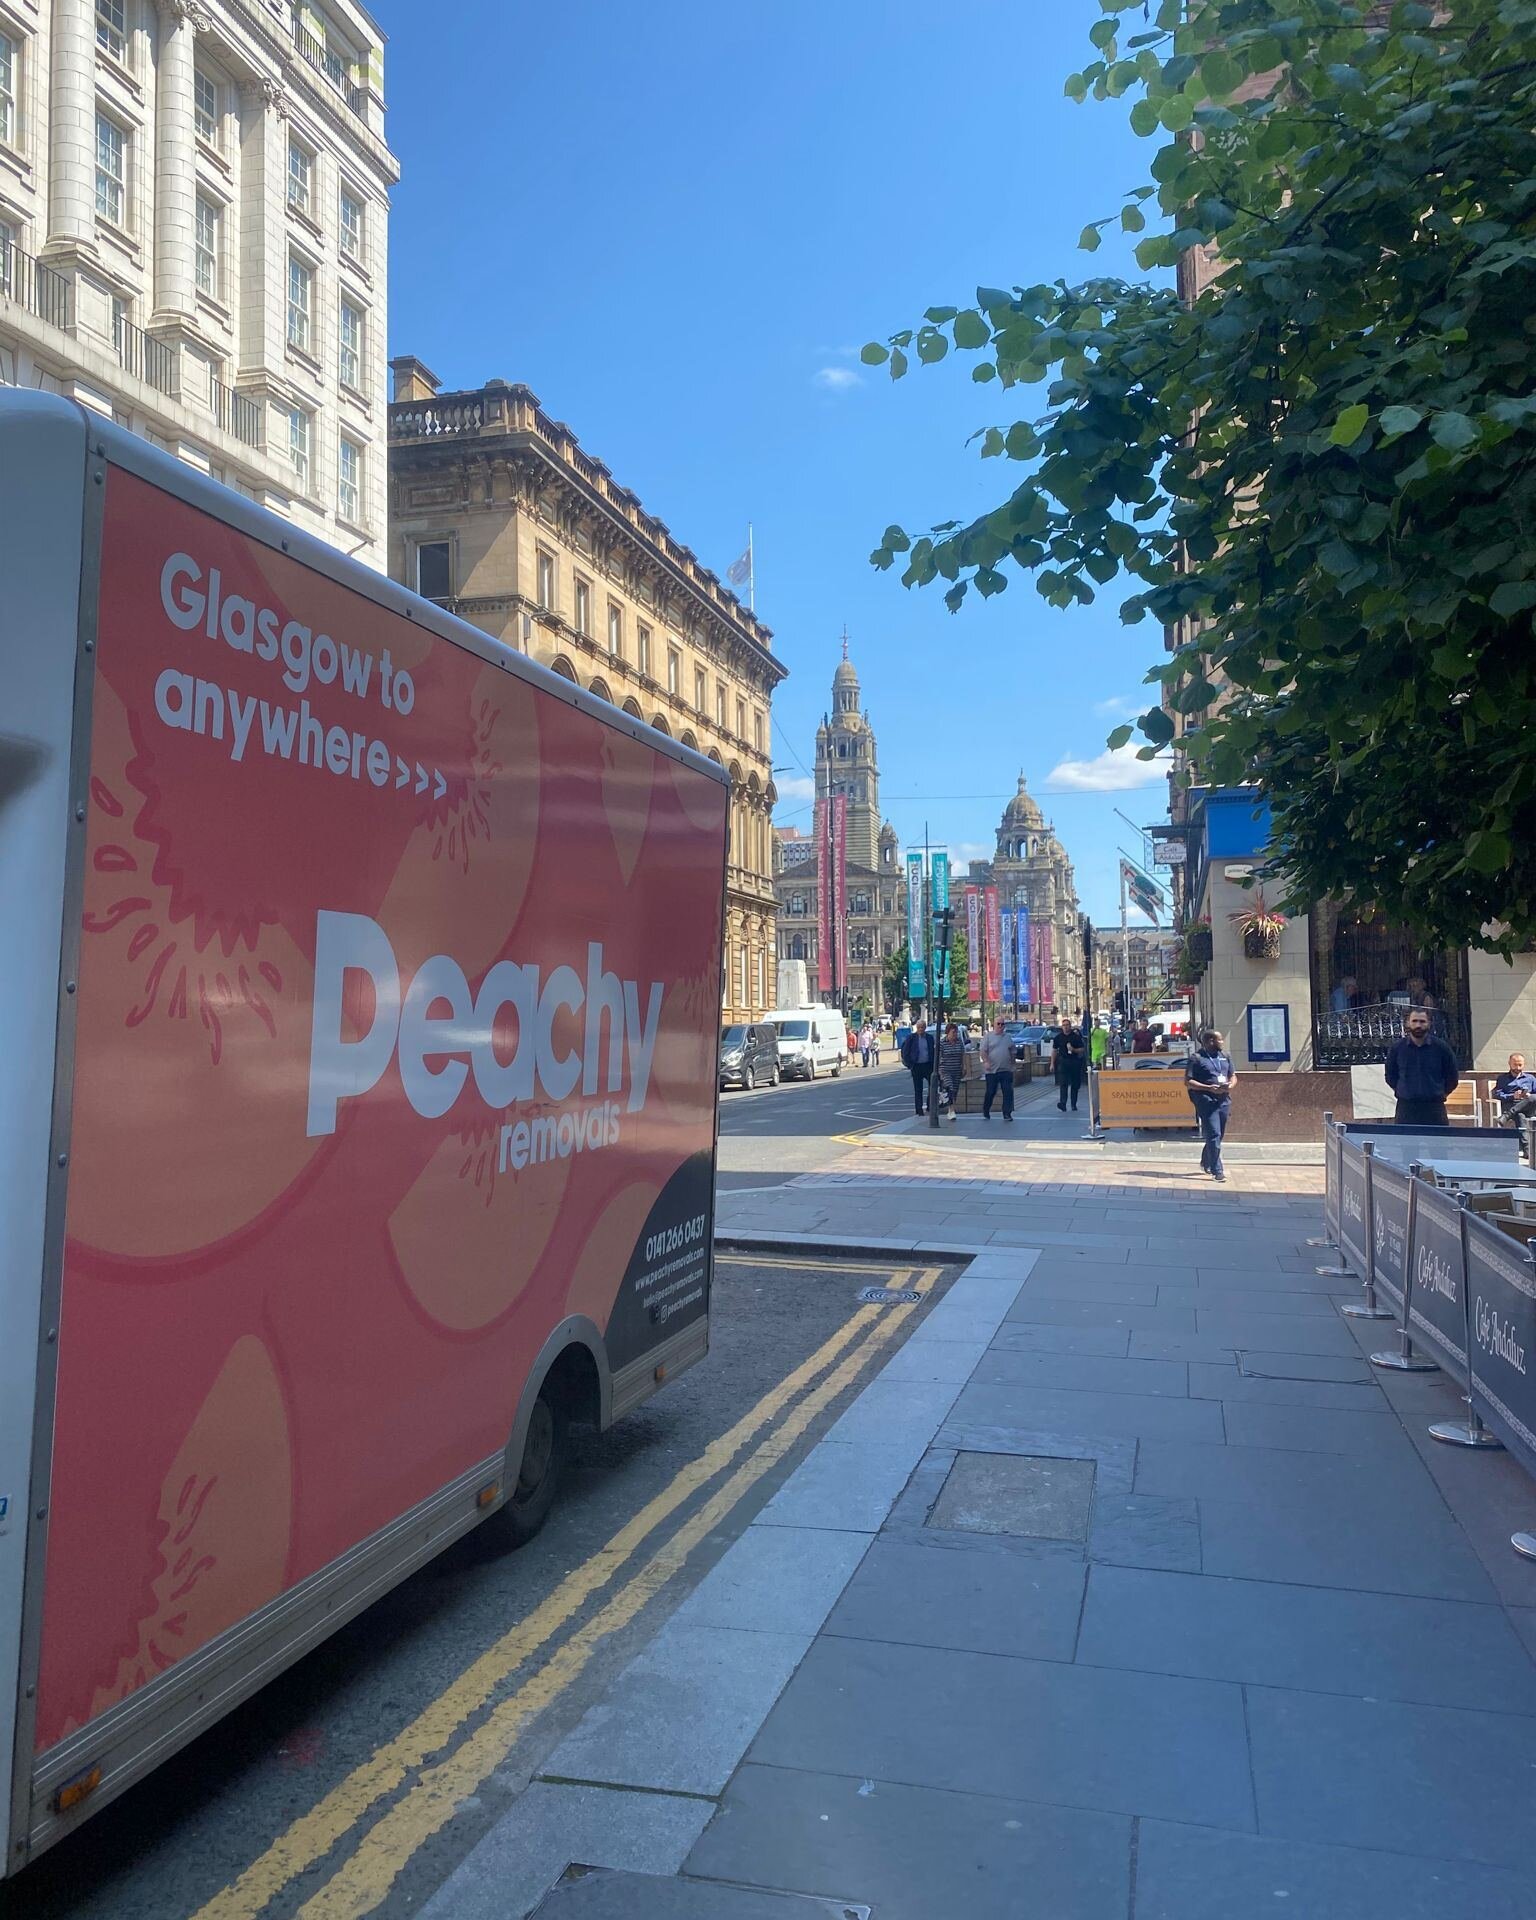 Peachy van and our dear city both looking stupendous in the sun ☀️🕶️🍑
.
.
.
.
.
#housemove #removals #removalscompany #professionalmovers #peachy #movingandstorage #moversandpackers #packing #movers #moving #movingday #movingcompany #movinghouse #r